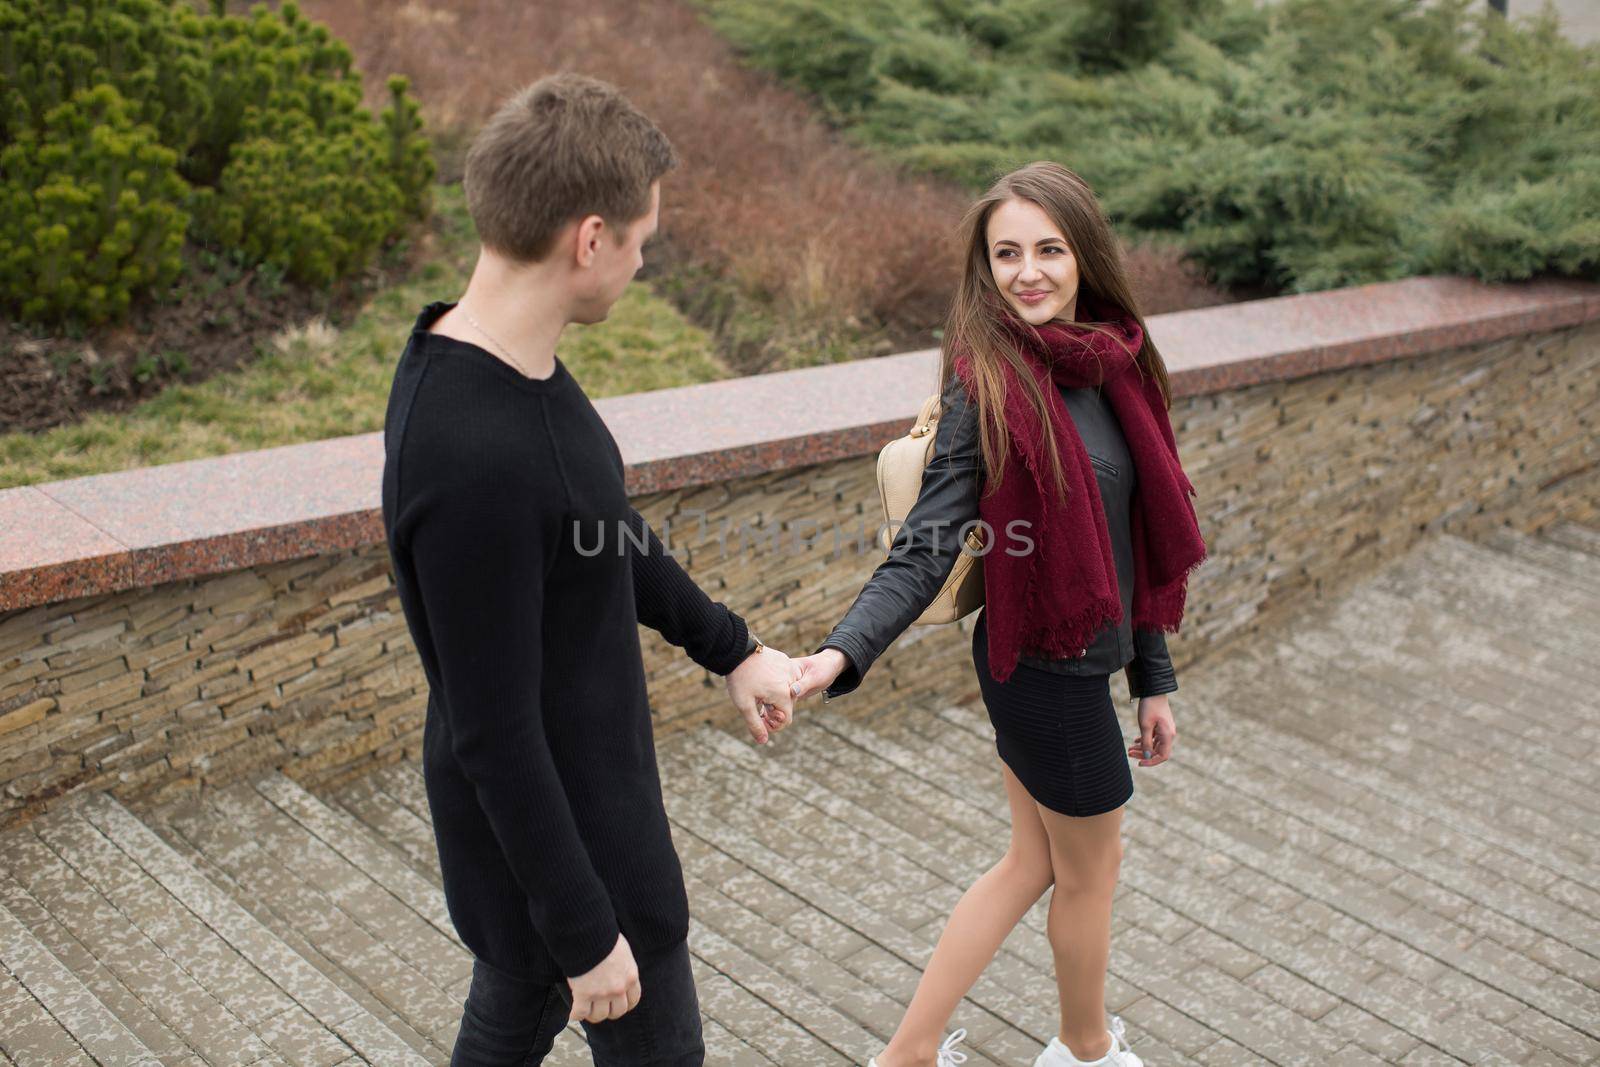 A beautiful woman and a man walk in the park by the hand